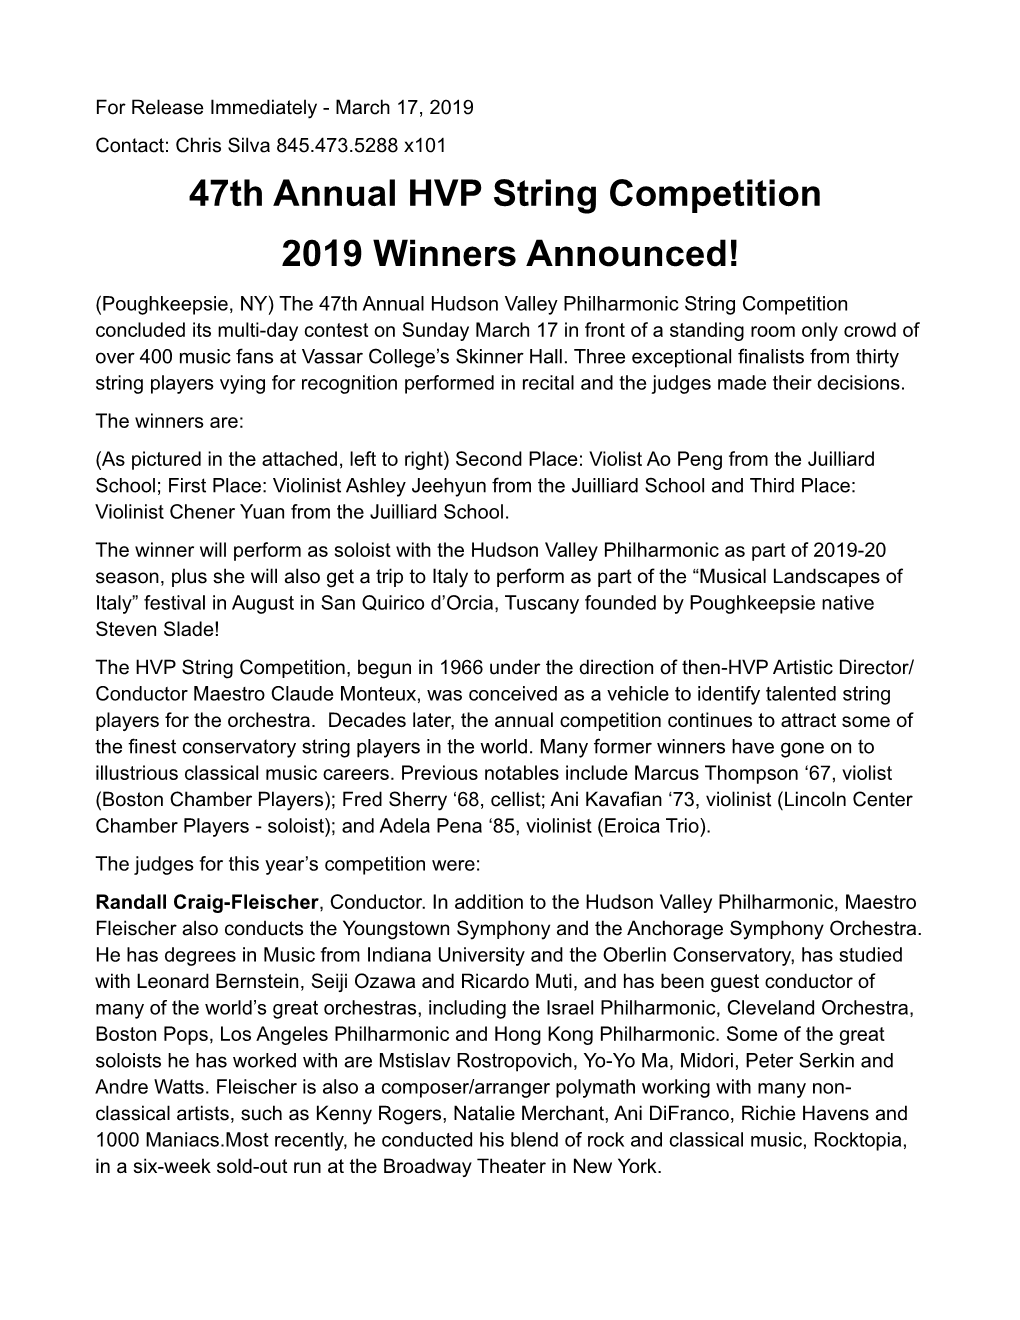 47Th Annual HVP String Competition 2019 Winners Announced!